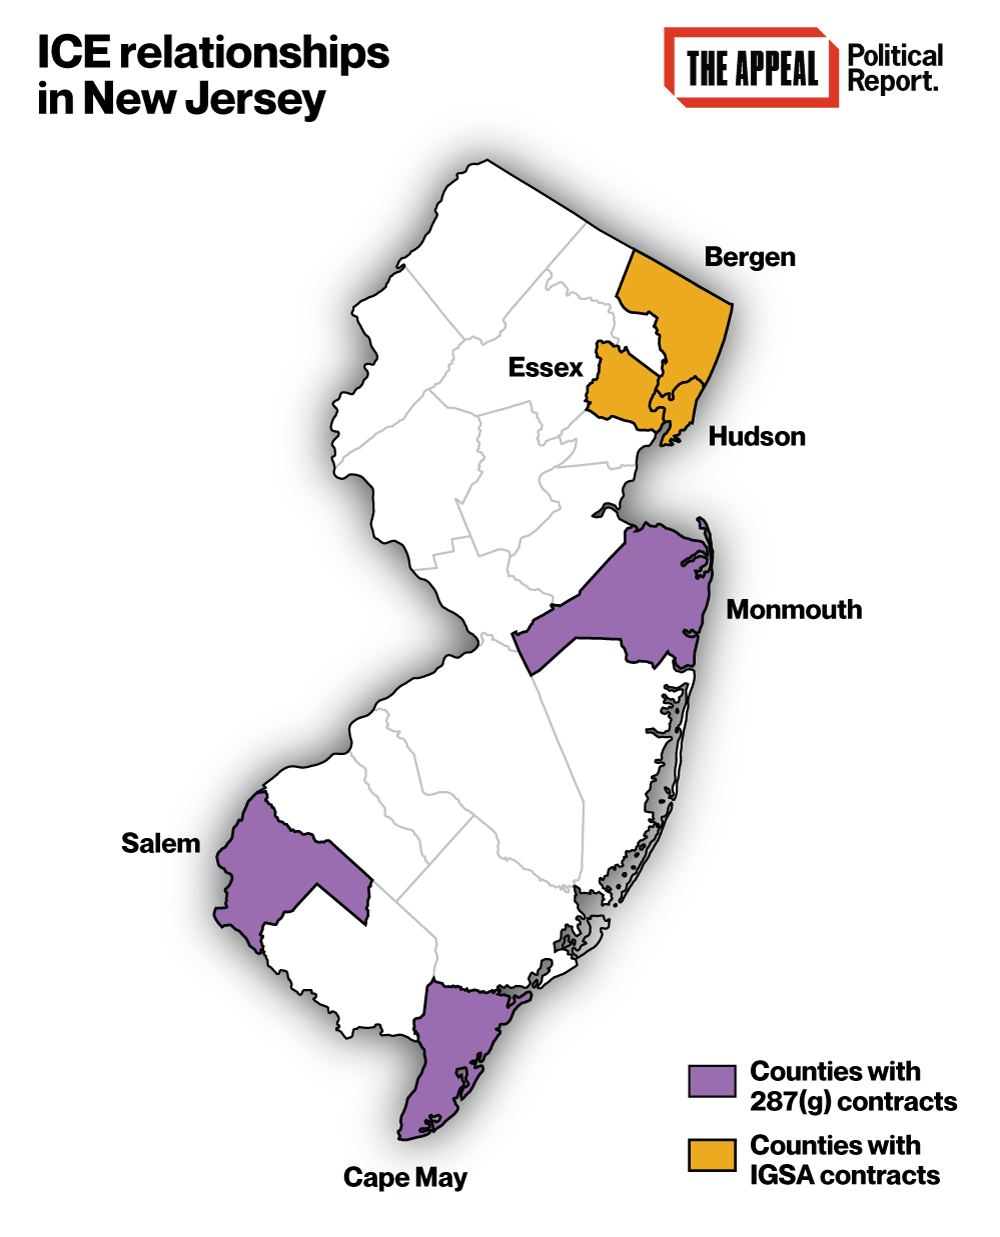 ICE relationships in New Jersey